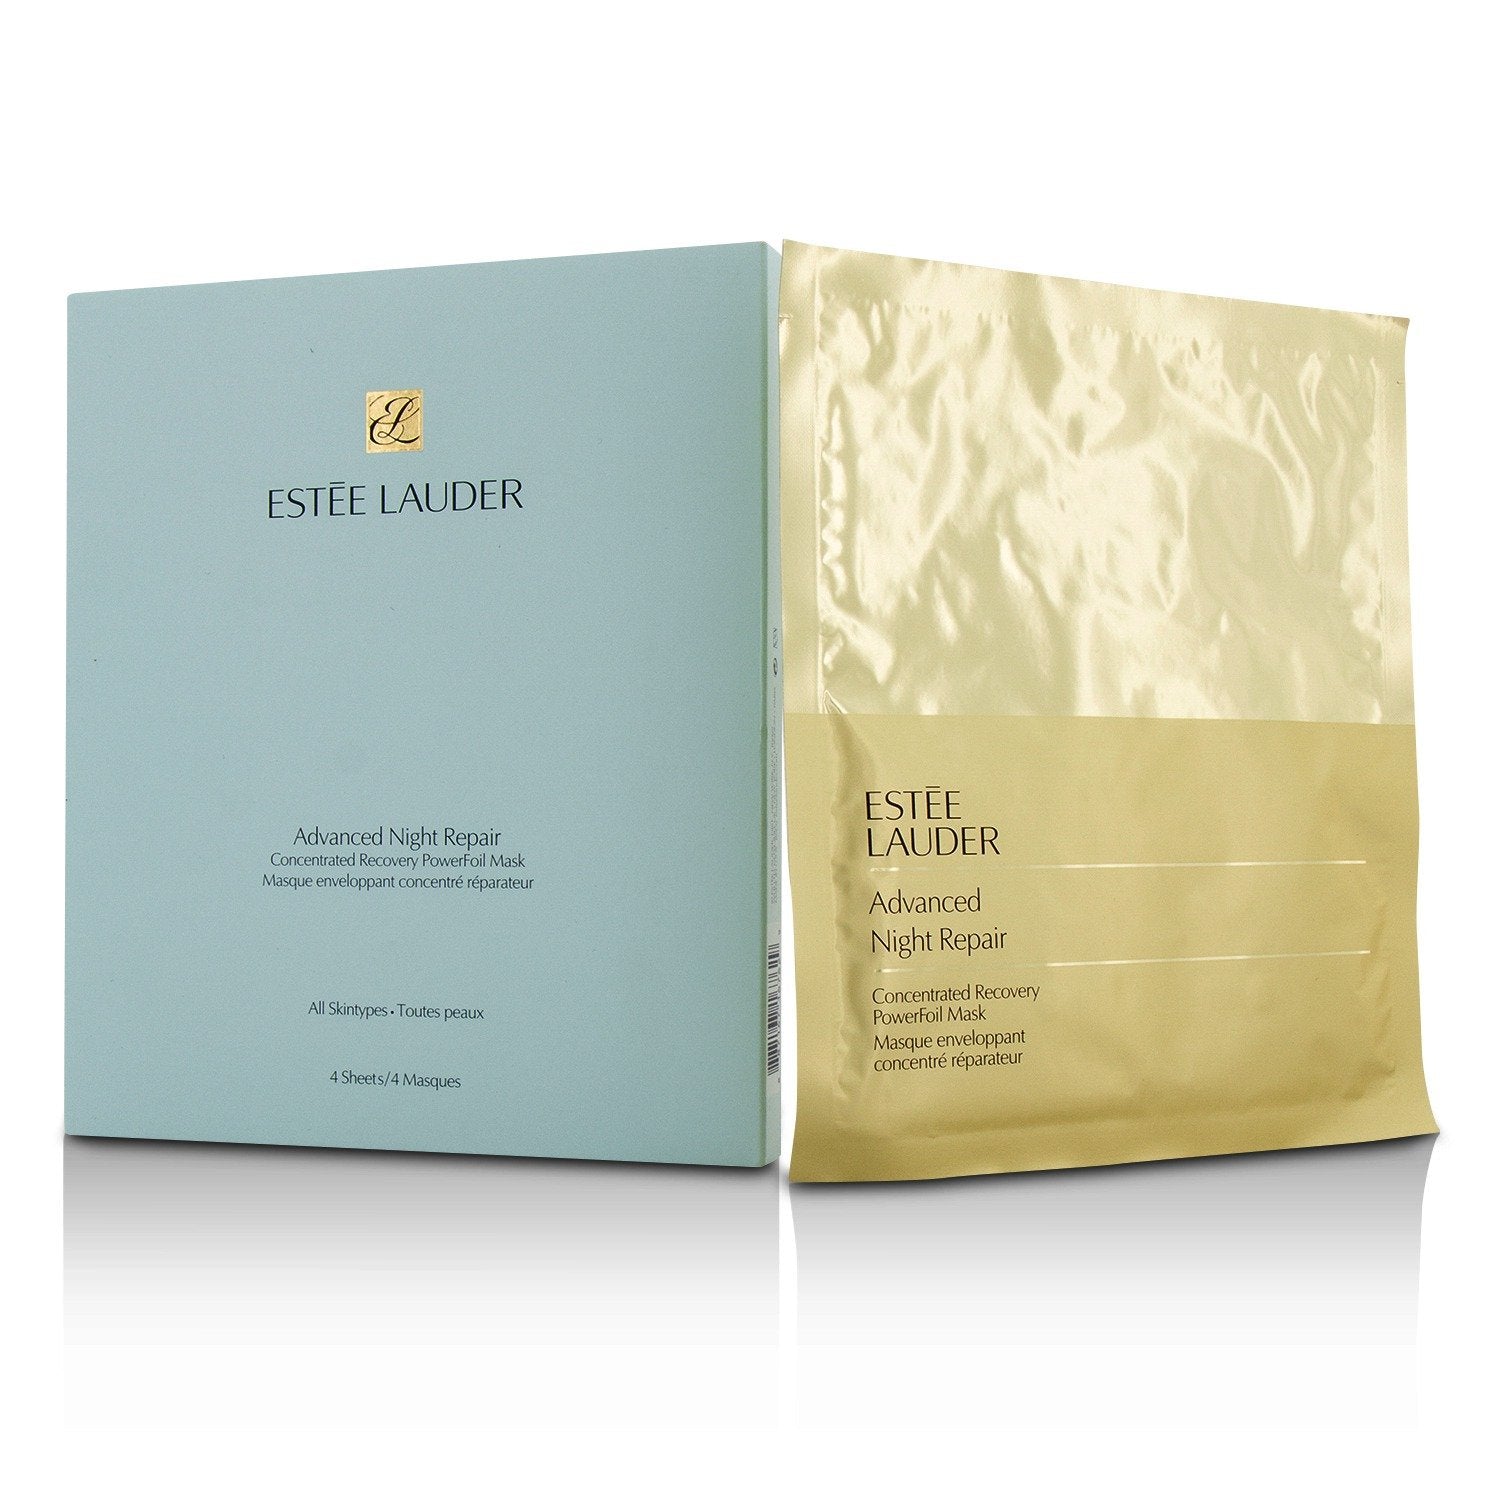 Estee Lauder Advanced Night Repair Concentrated Recovery Powerfoil Mask - 4Sheets Face Masks